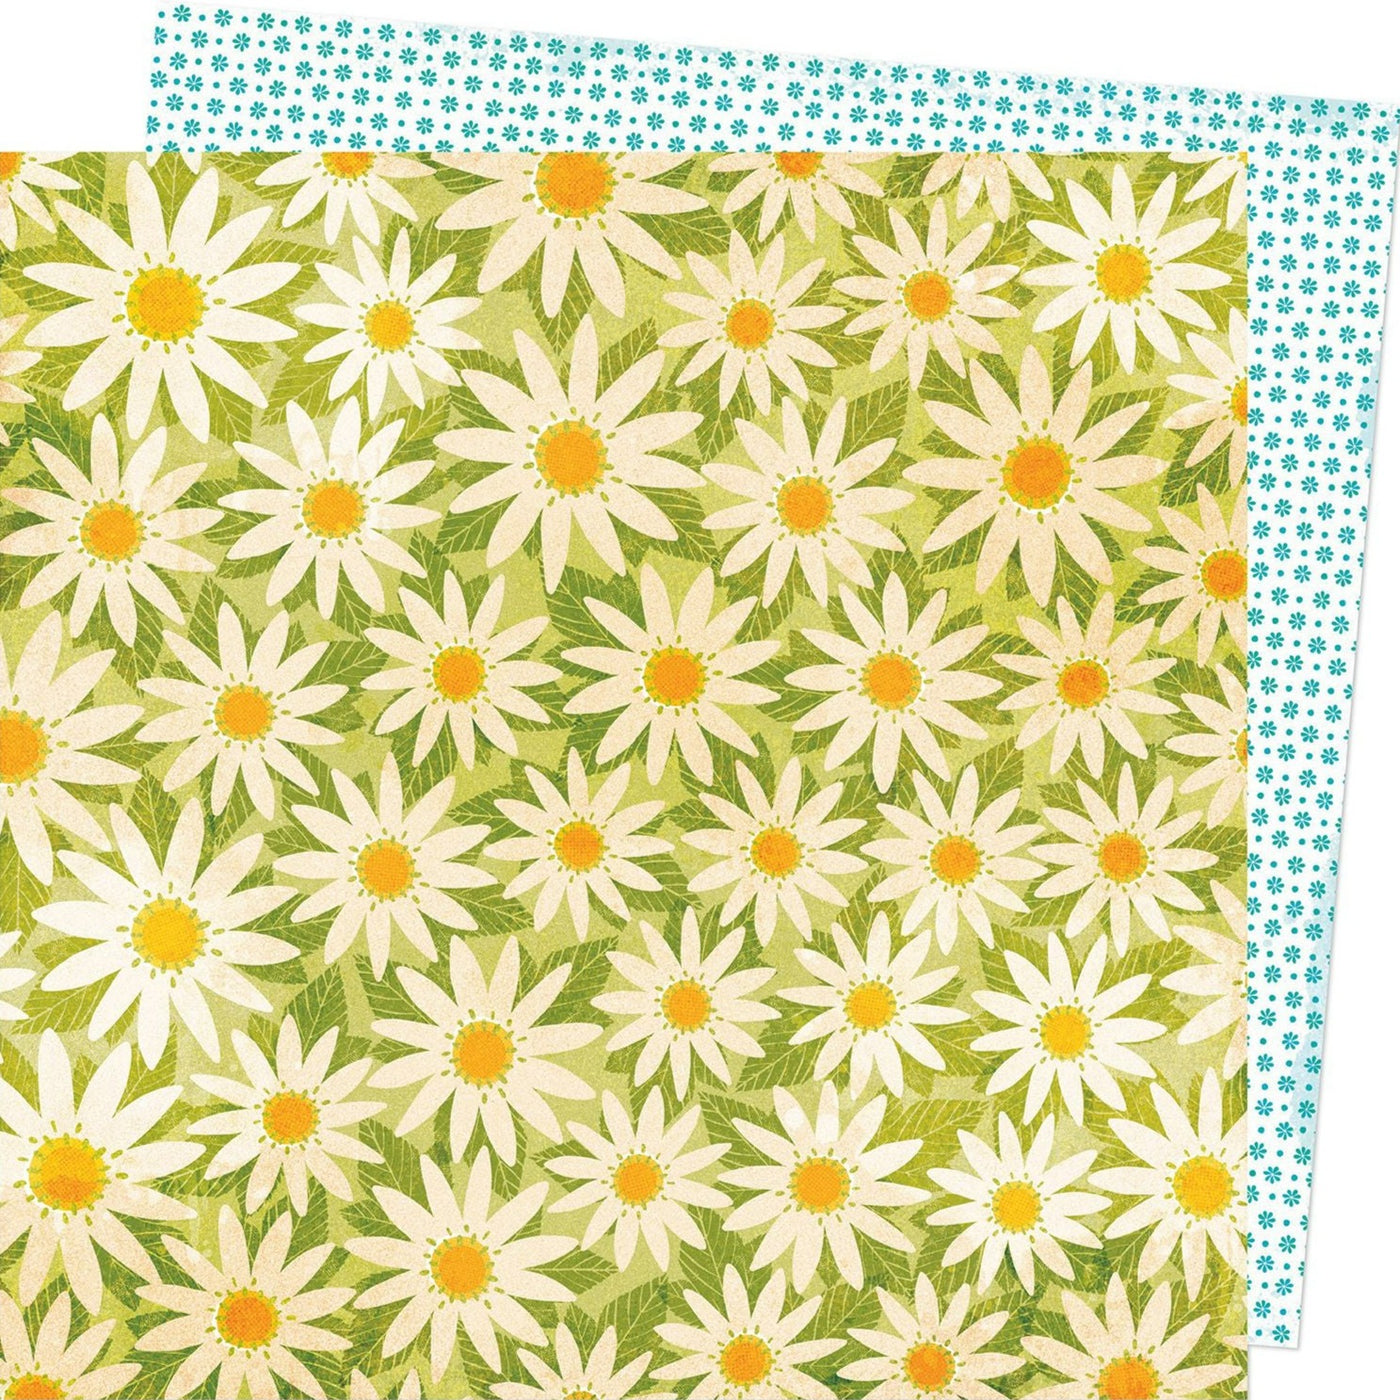 SUMMER HOUSE - 12x12 Double-Sided Patterned Paper - Vicki Boutin